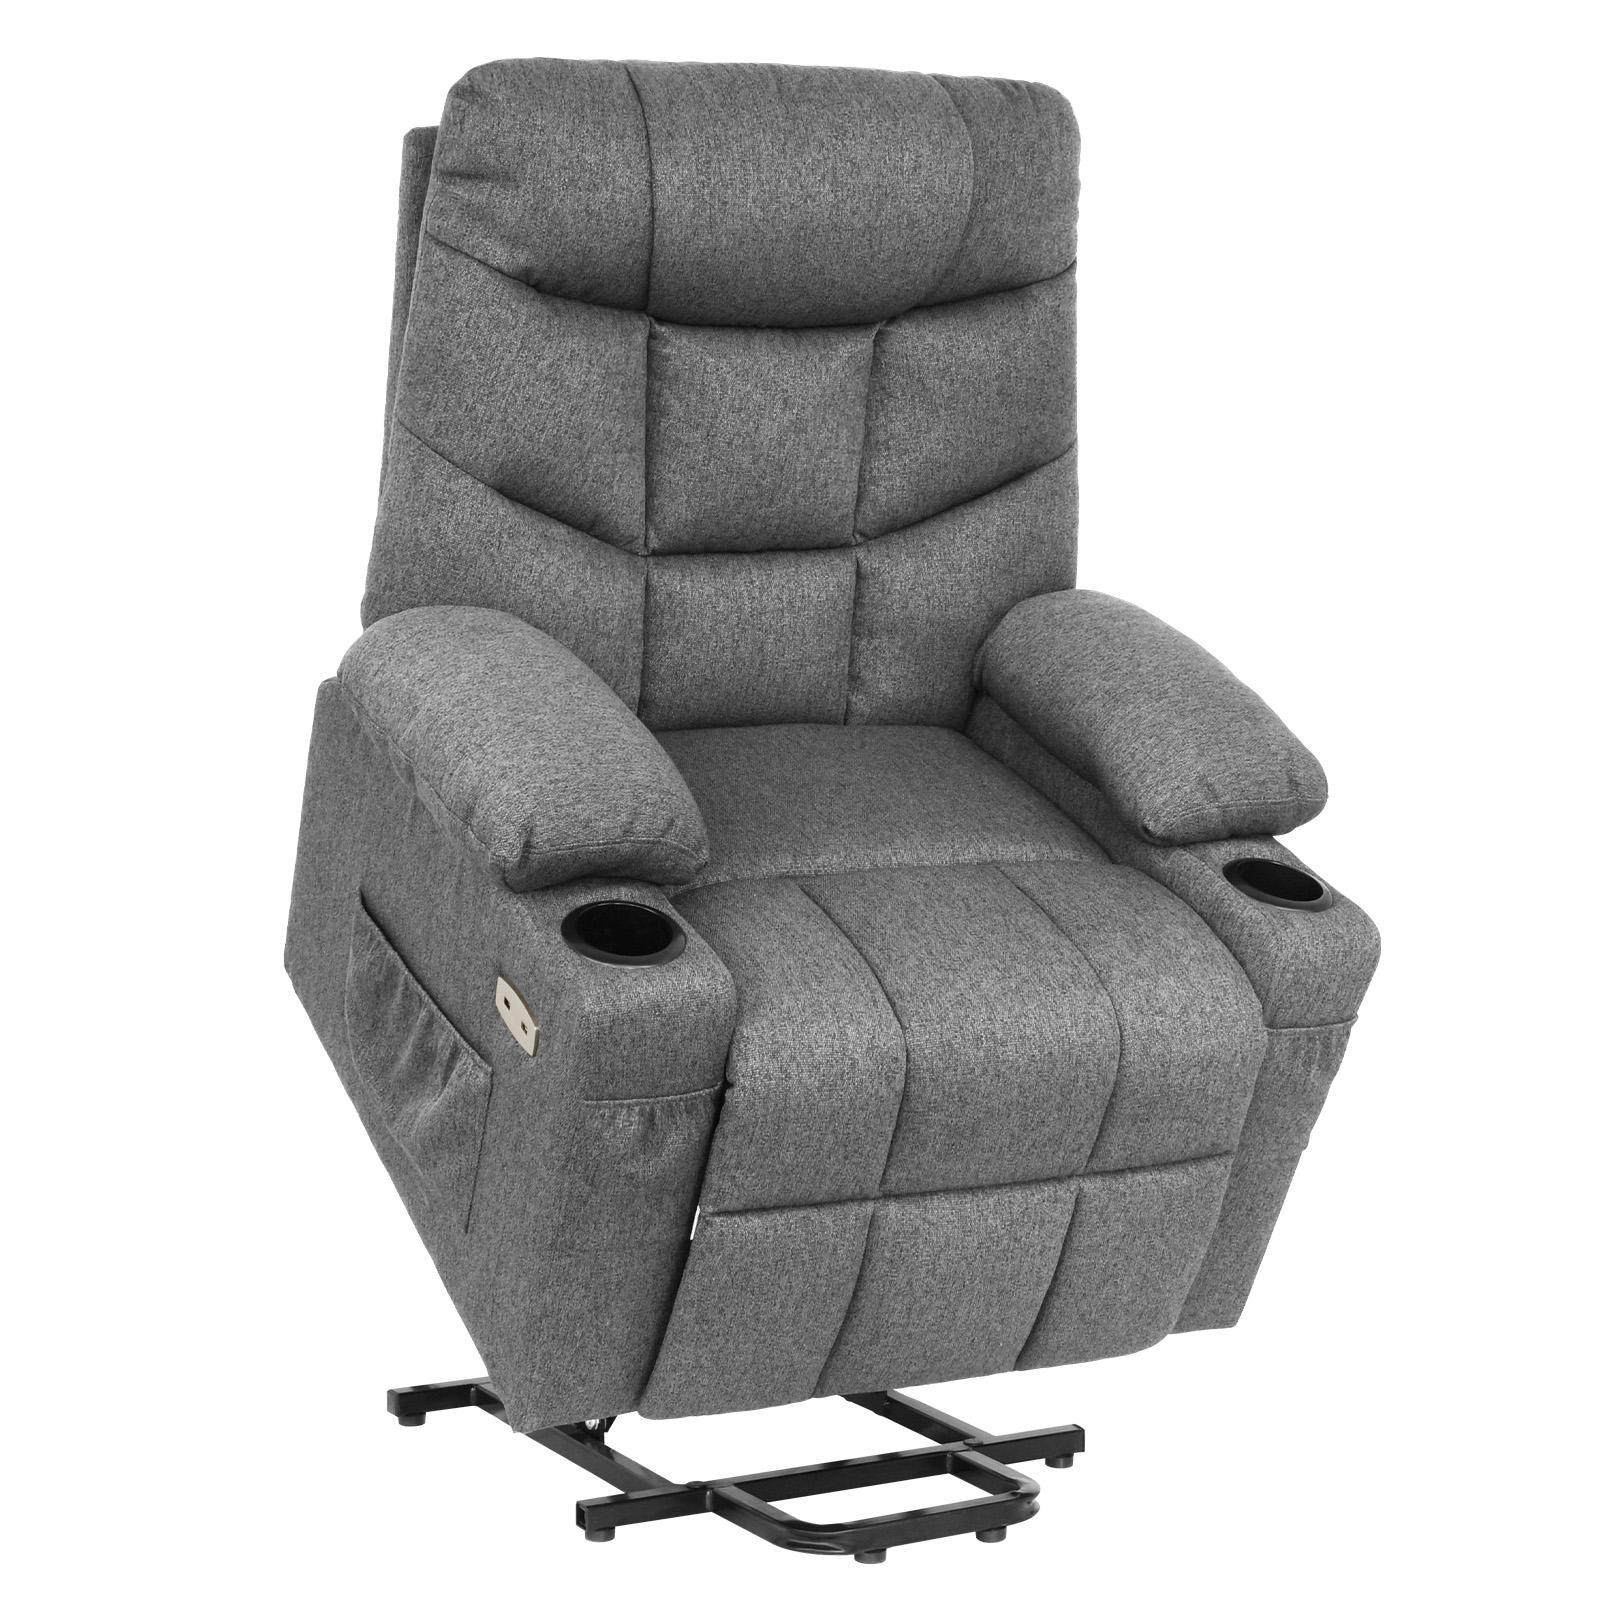 Advwin Recliner Chair Electric Lift Chairs Heated Vibration Massage Grey